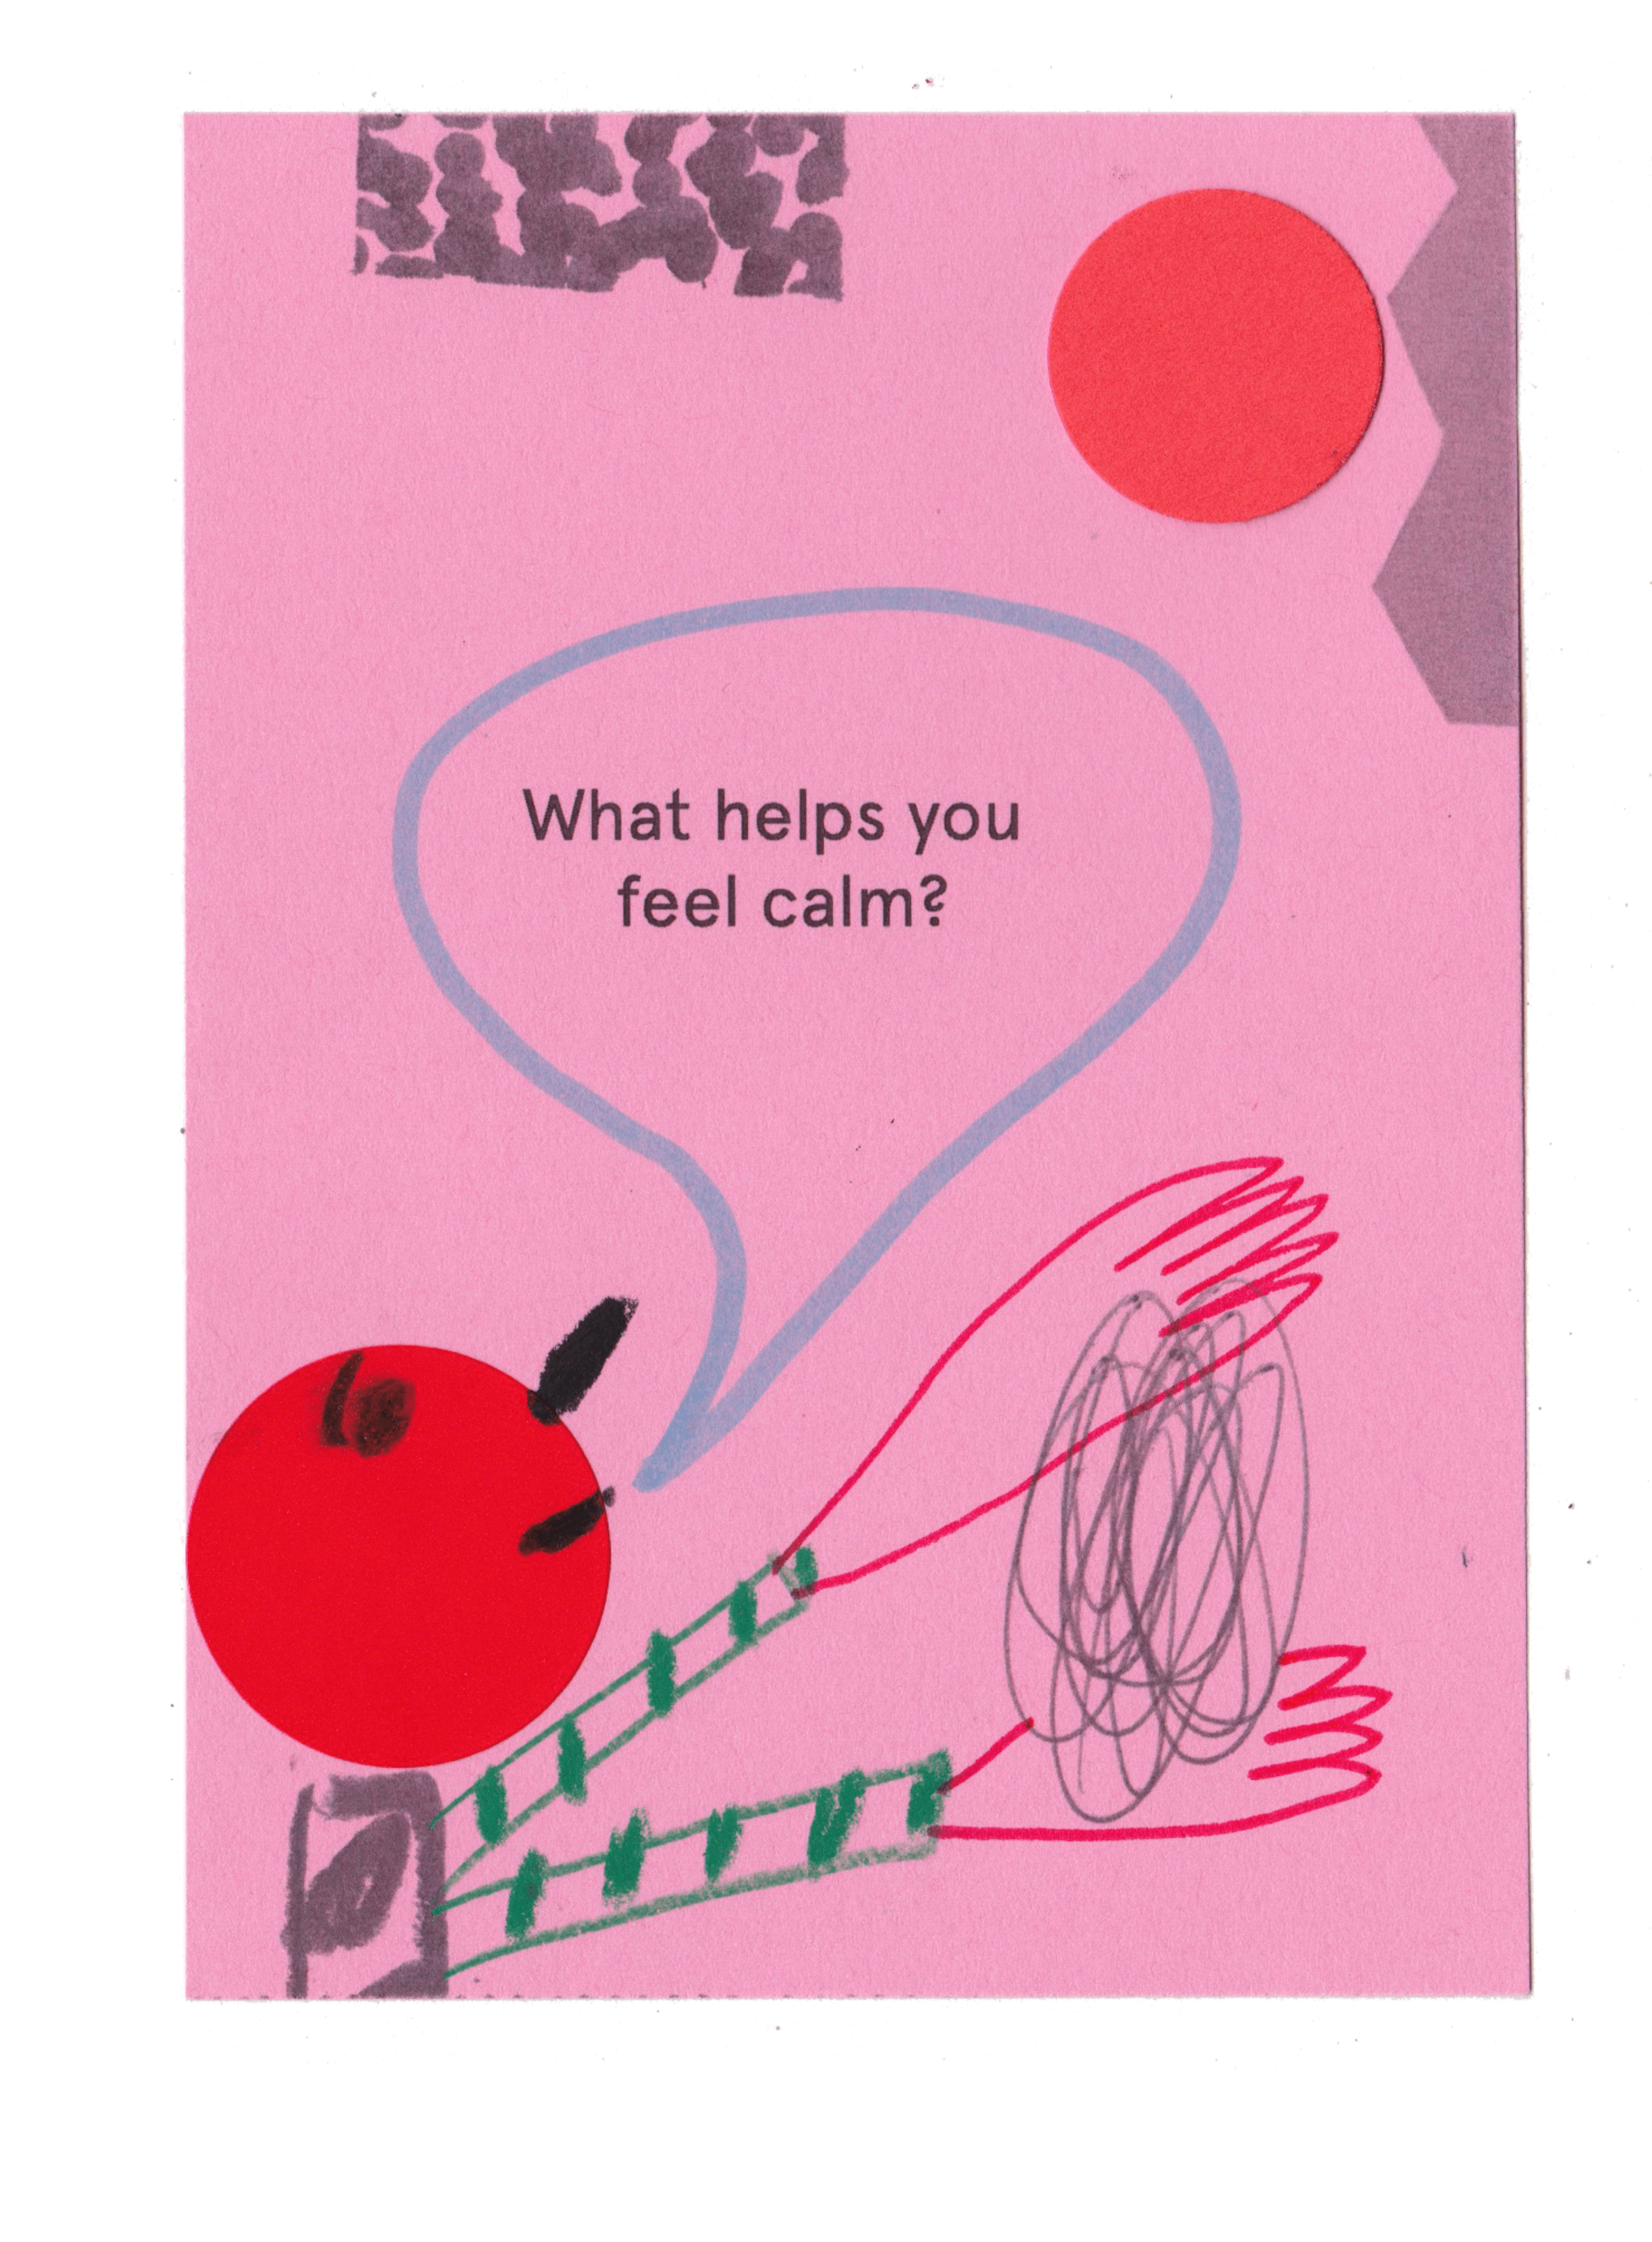 Collage of character with speech bubble saying ‘what helps you feel calm?’